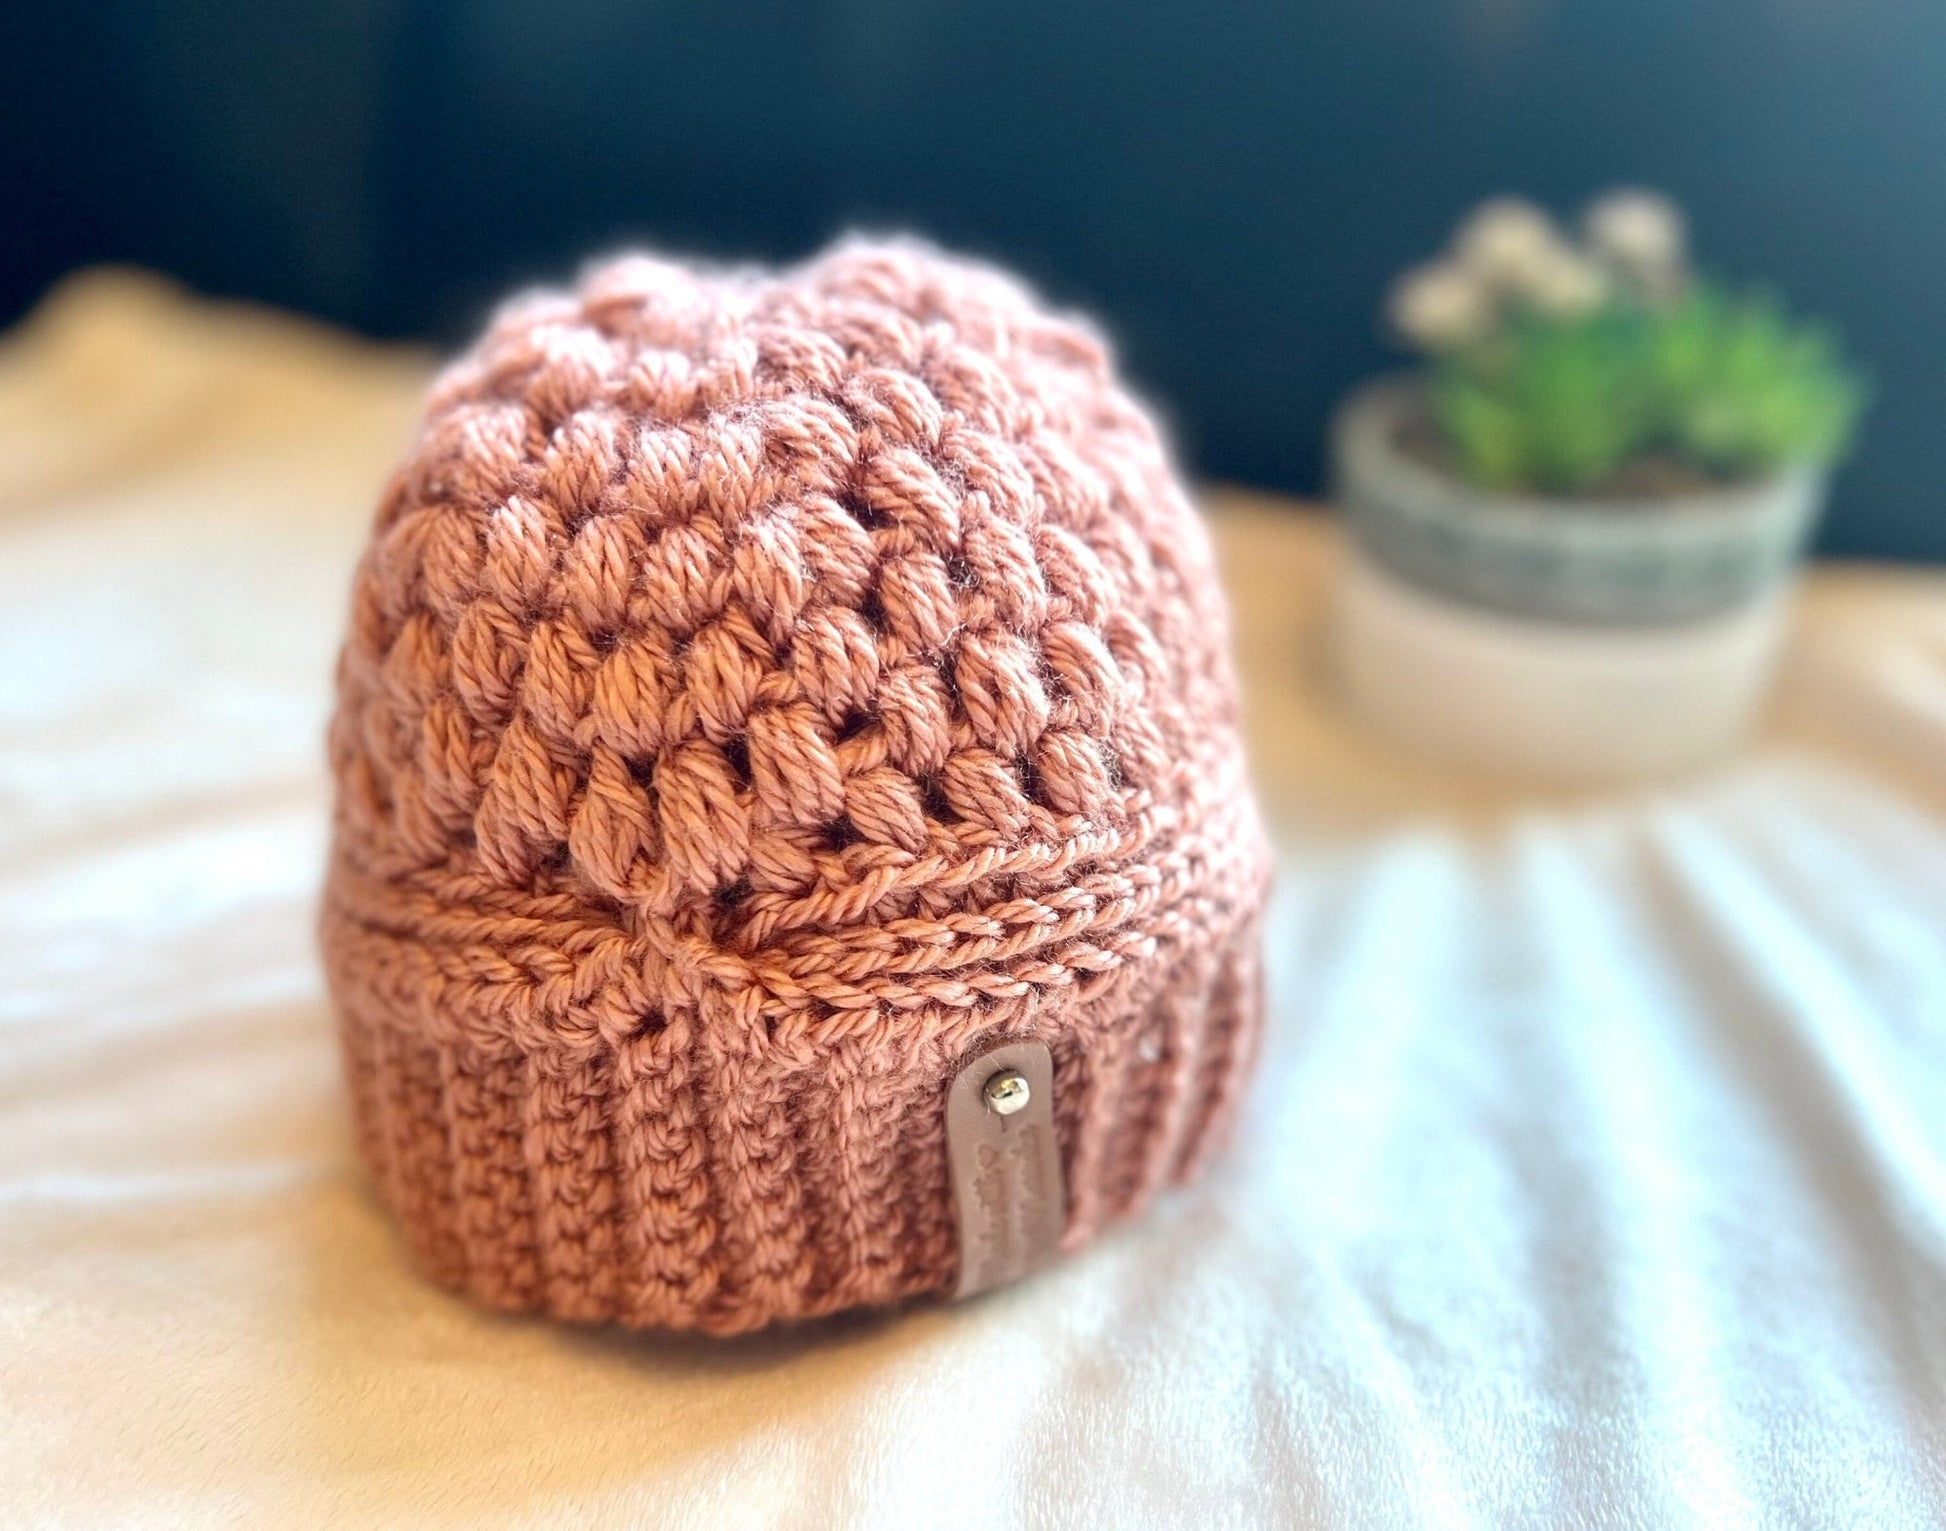 Crochet hat for baby girl, dusty rose pink baby girl hat, fall season hats, cute beanie hat, handmade crochet hat for girl - Lilly Grace Sparkle Boutique